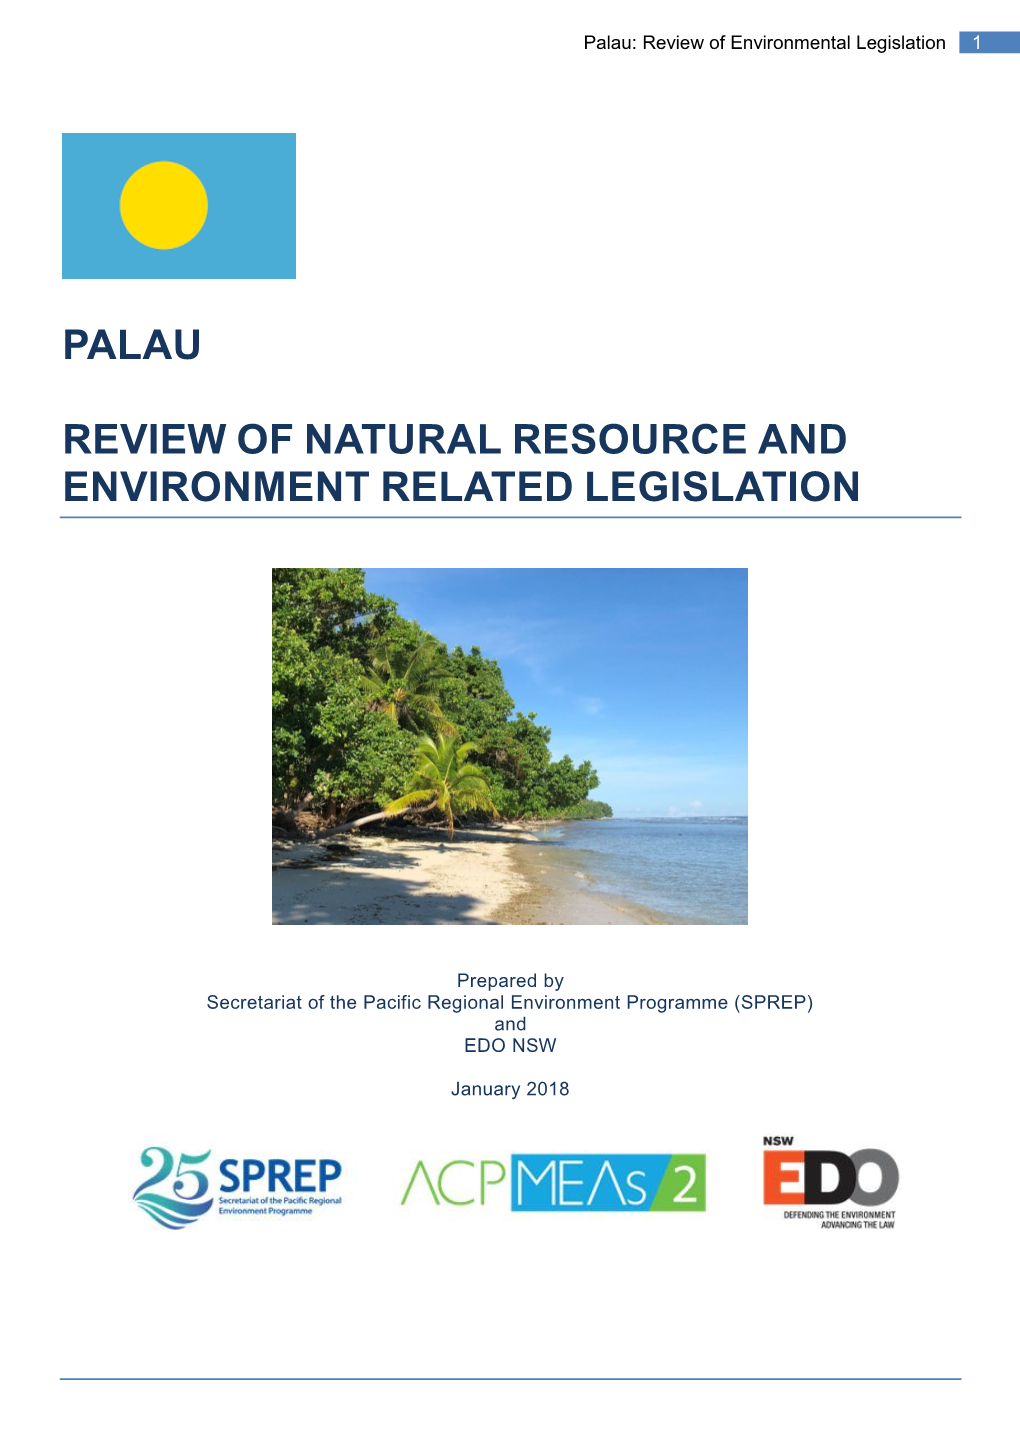 Palau Review of Natural Resource and Environment Related Legislation